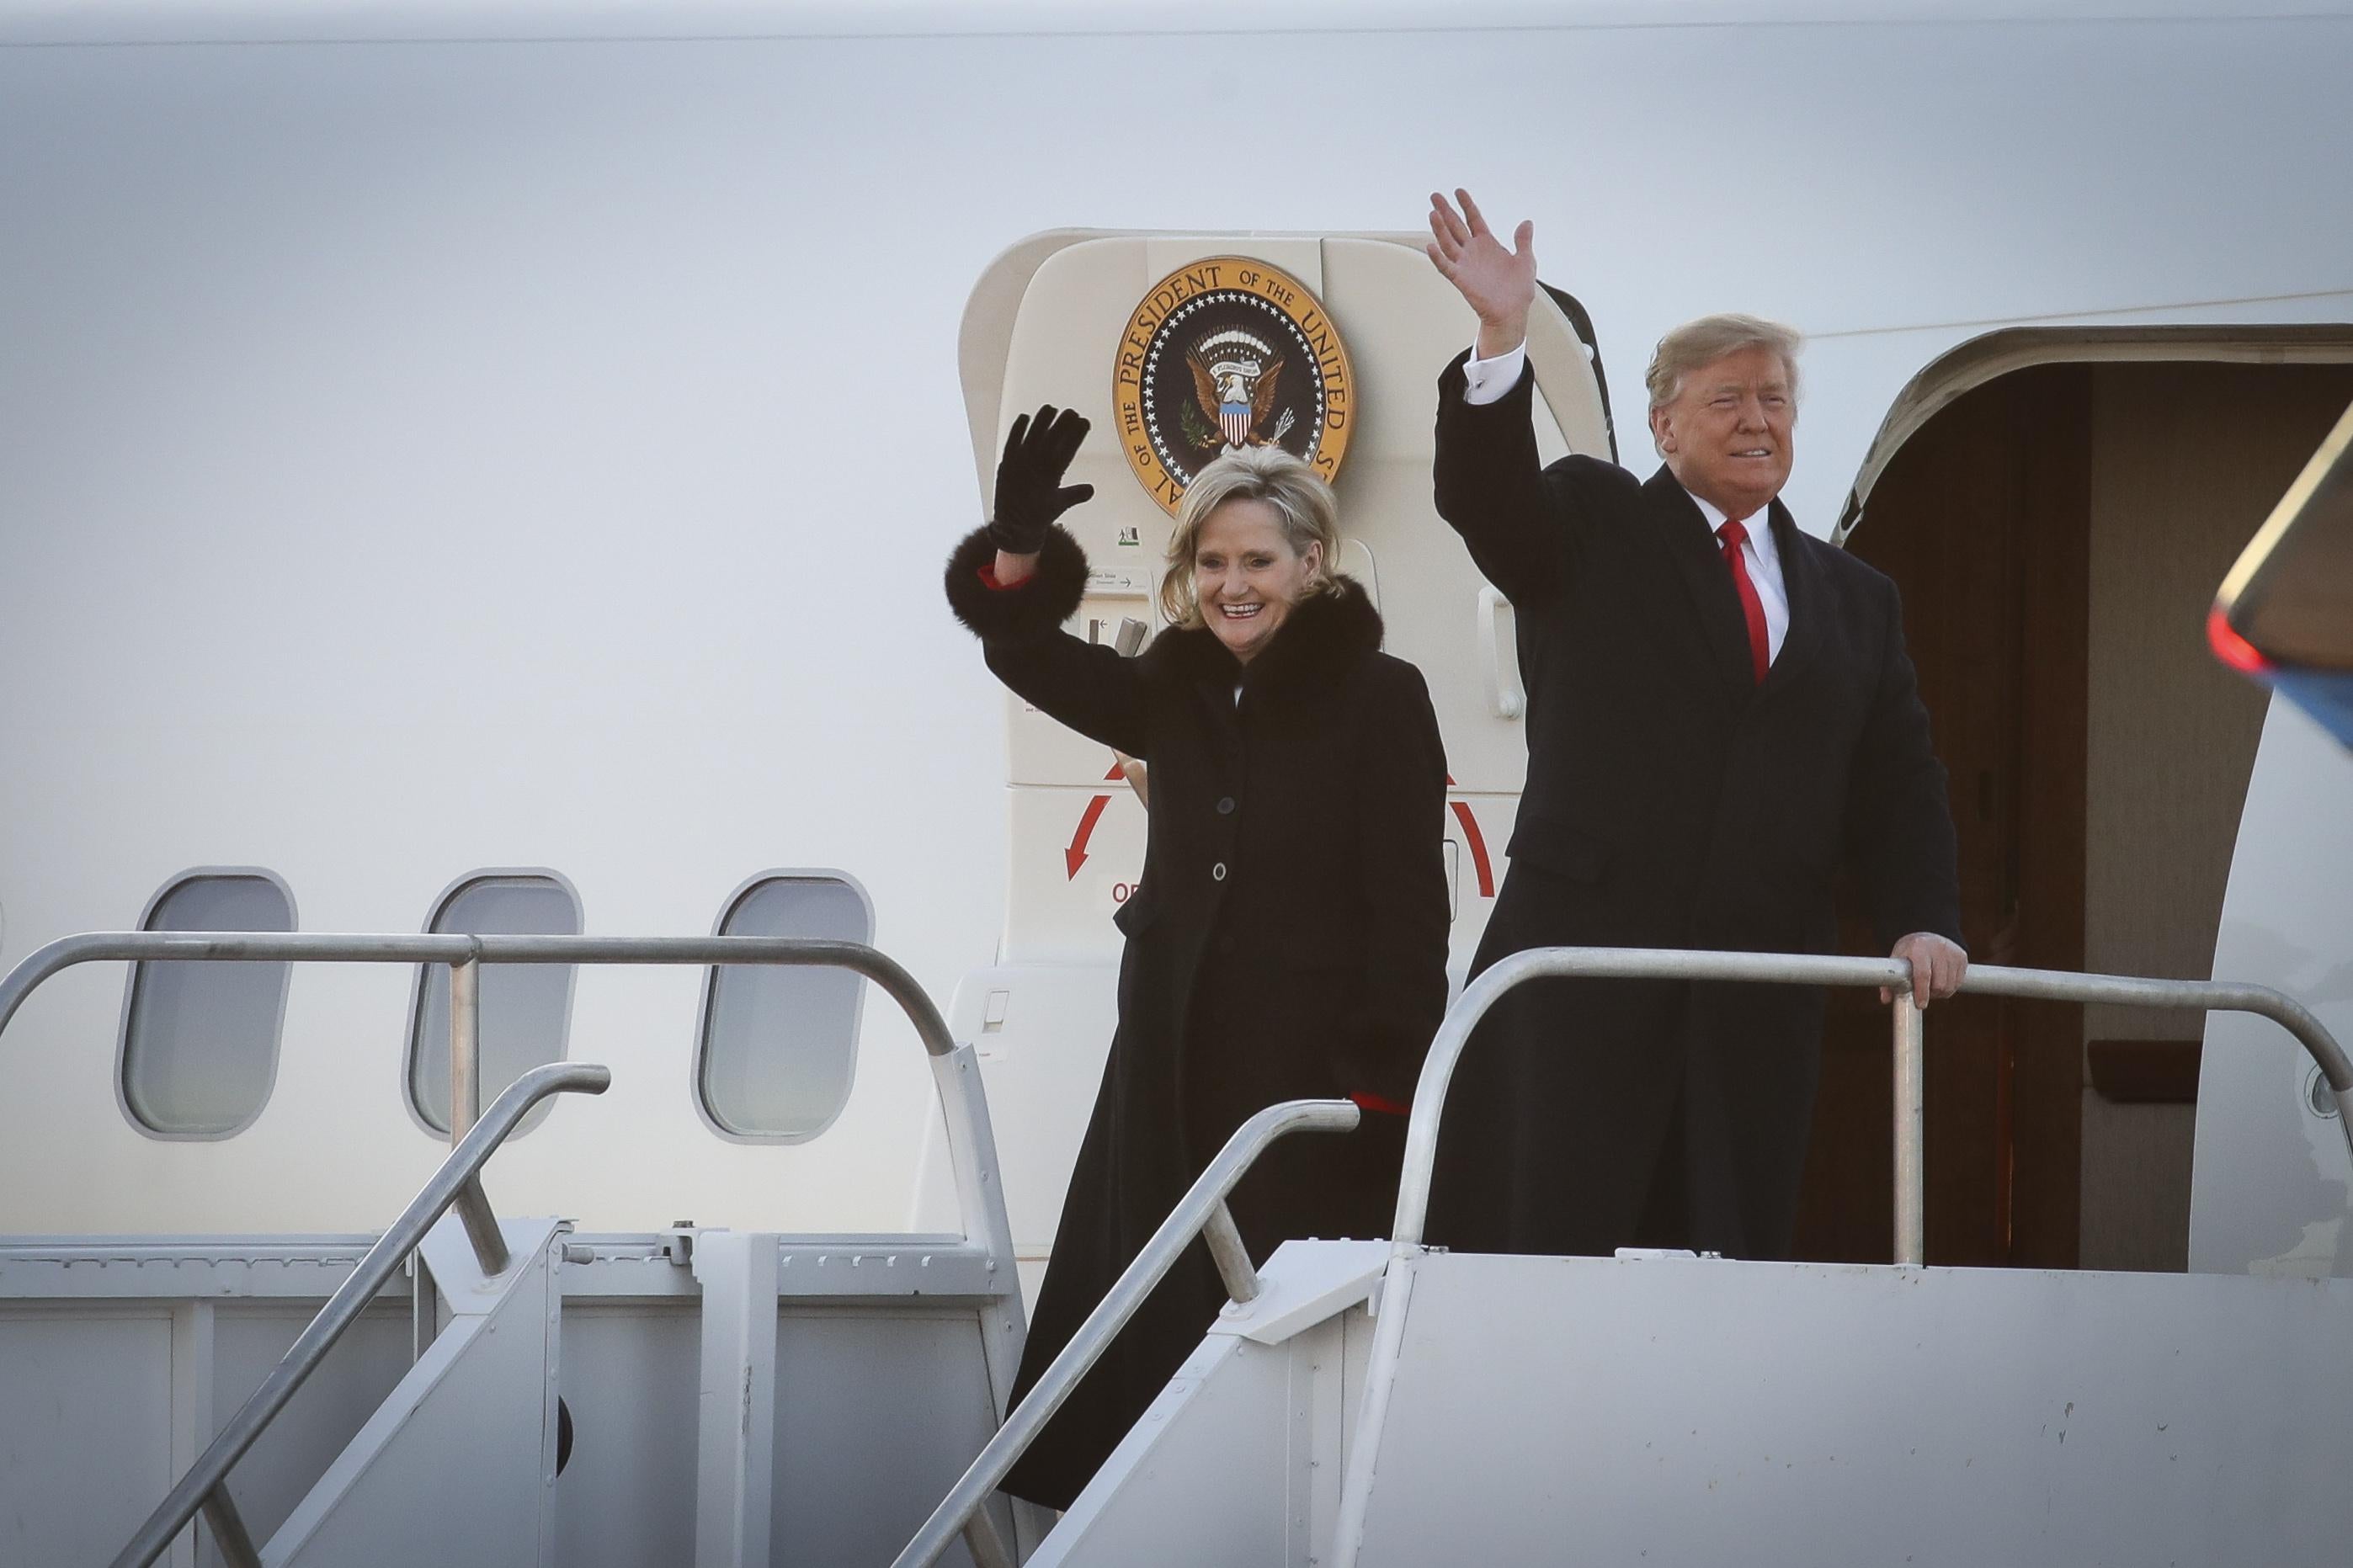 Trump's last midterms rally was for Sen. Cindy Hyde-Smith in Mississippi. 